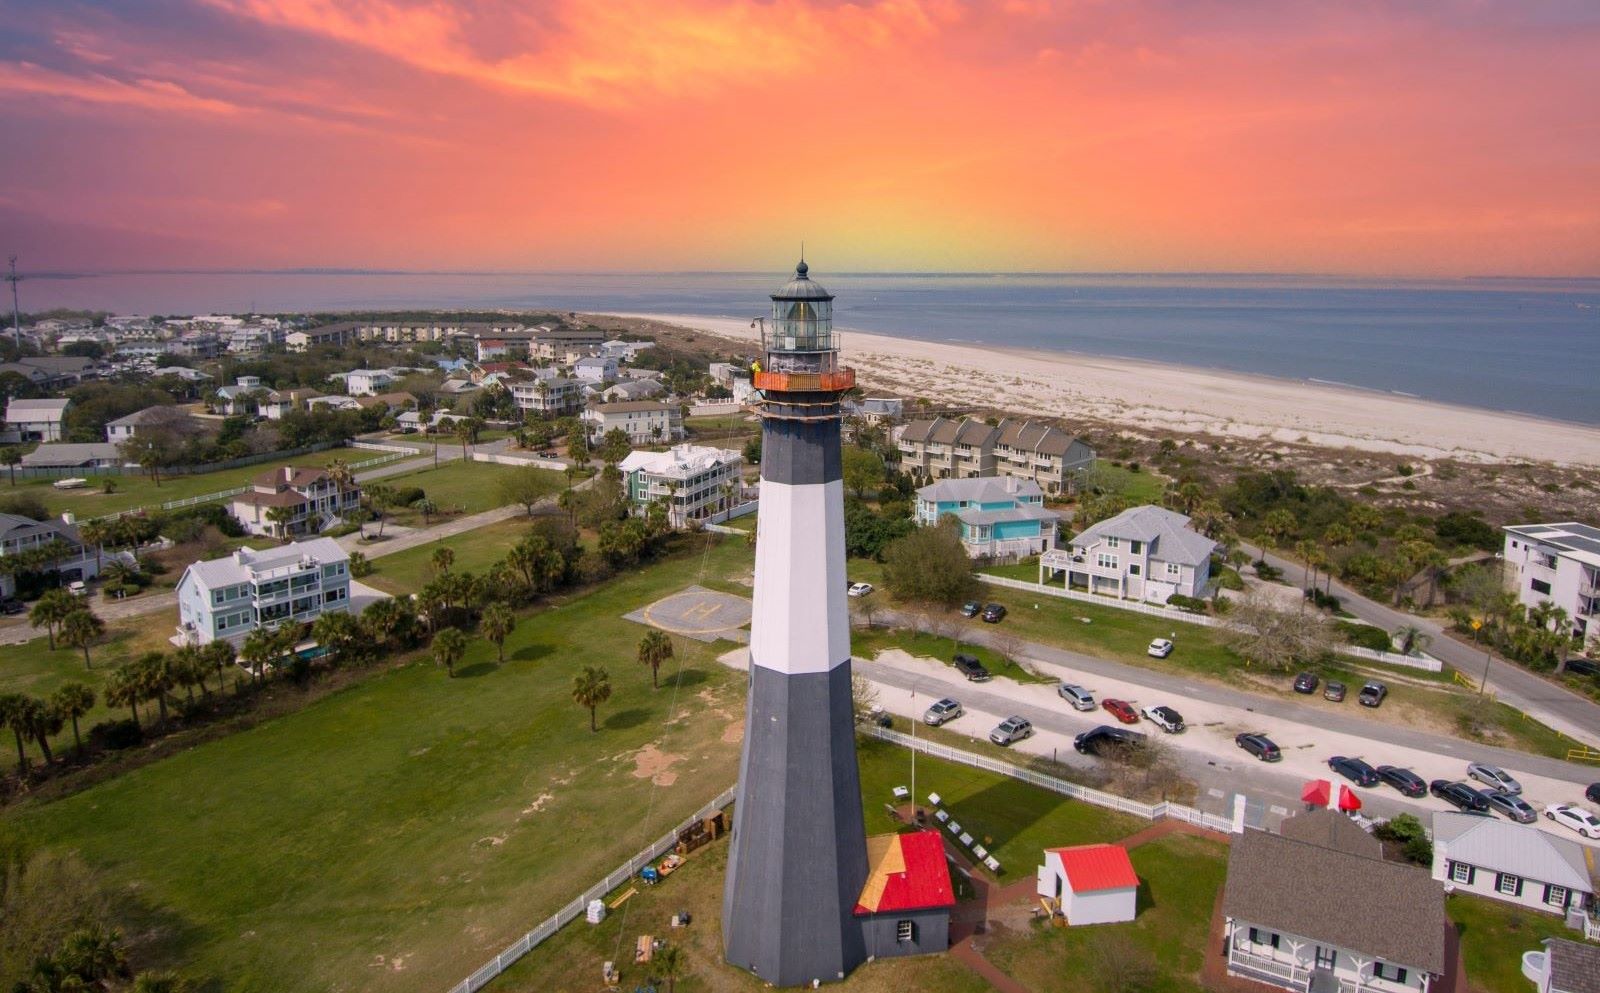 Image credit: Shutterstock / Marcus E Jones <p>Thanks to a friend’s suggestion, we discovered Tybee Island. It’s perfect for families who enjoy the beach but want to avoid the crowds of more popular destinations. The island’s laid-back vibe and warm waters make it ideal for a relaxing weekend. Budget Tip: Pack a picnic to save on meals and enjoy the beach longer!</p>